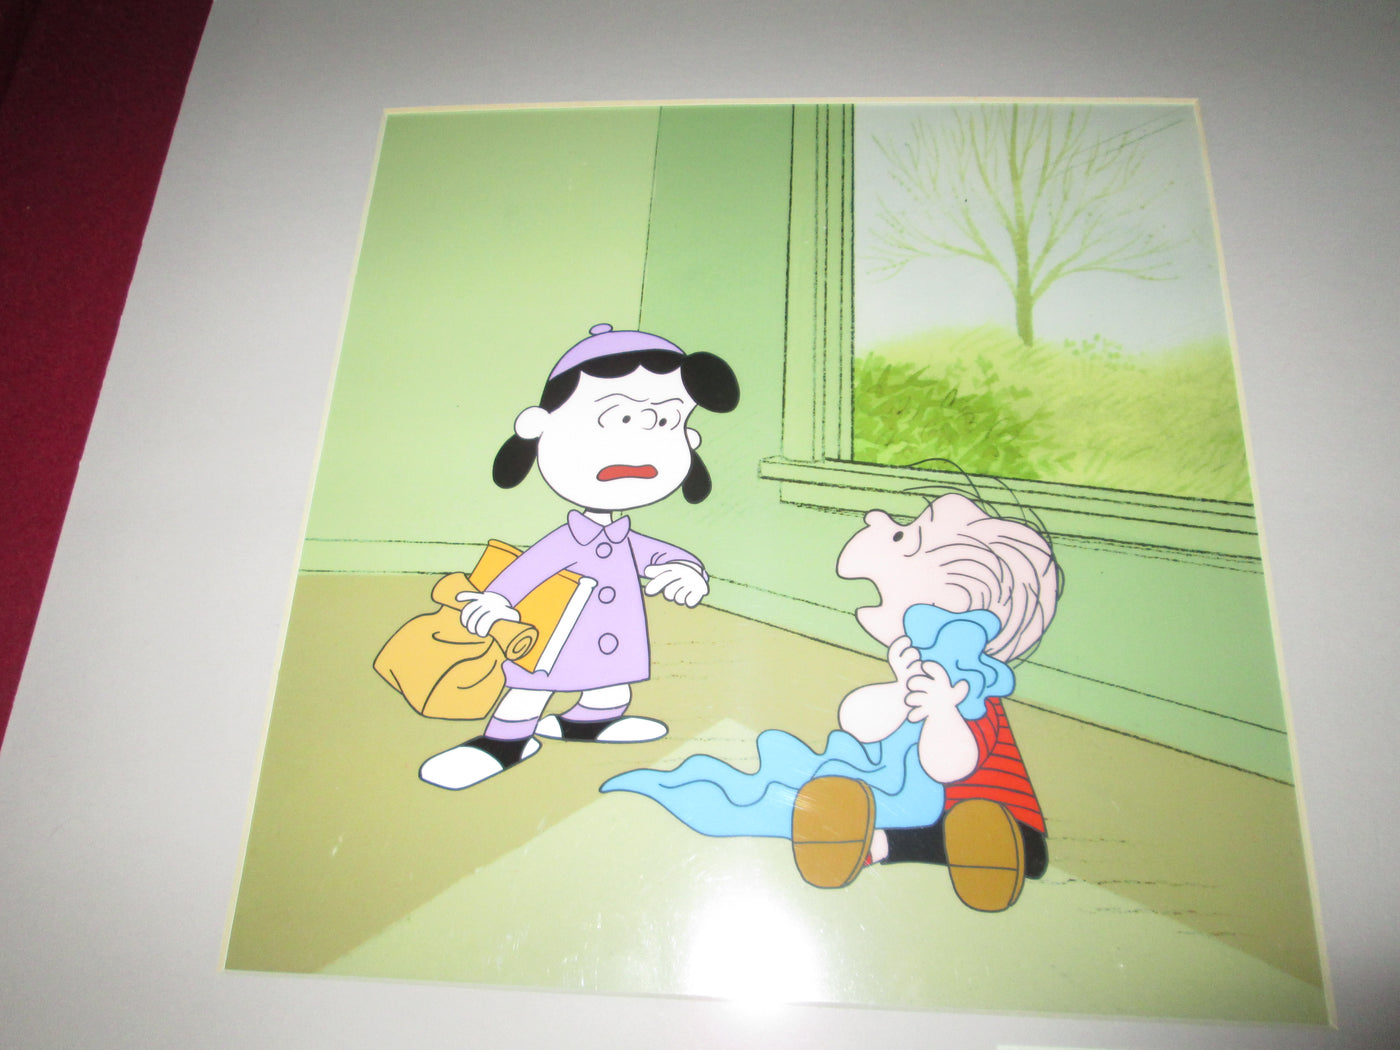 Original Peanuts Production Cel of Lucy and Linus